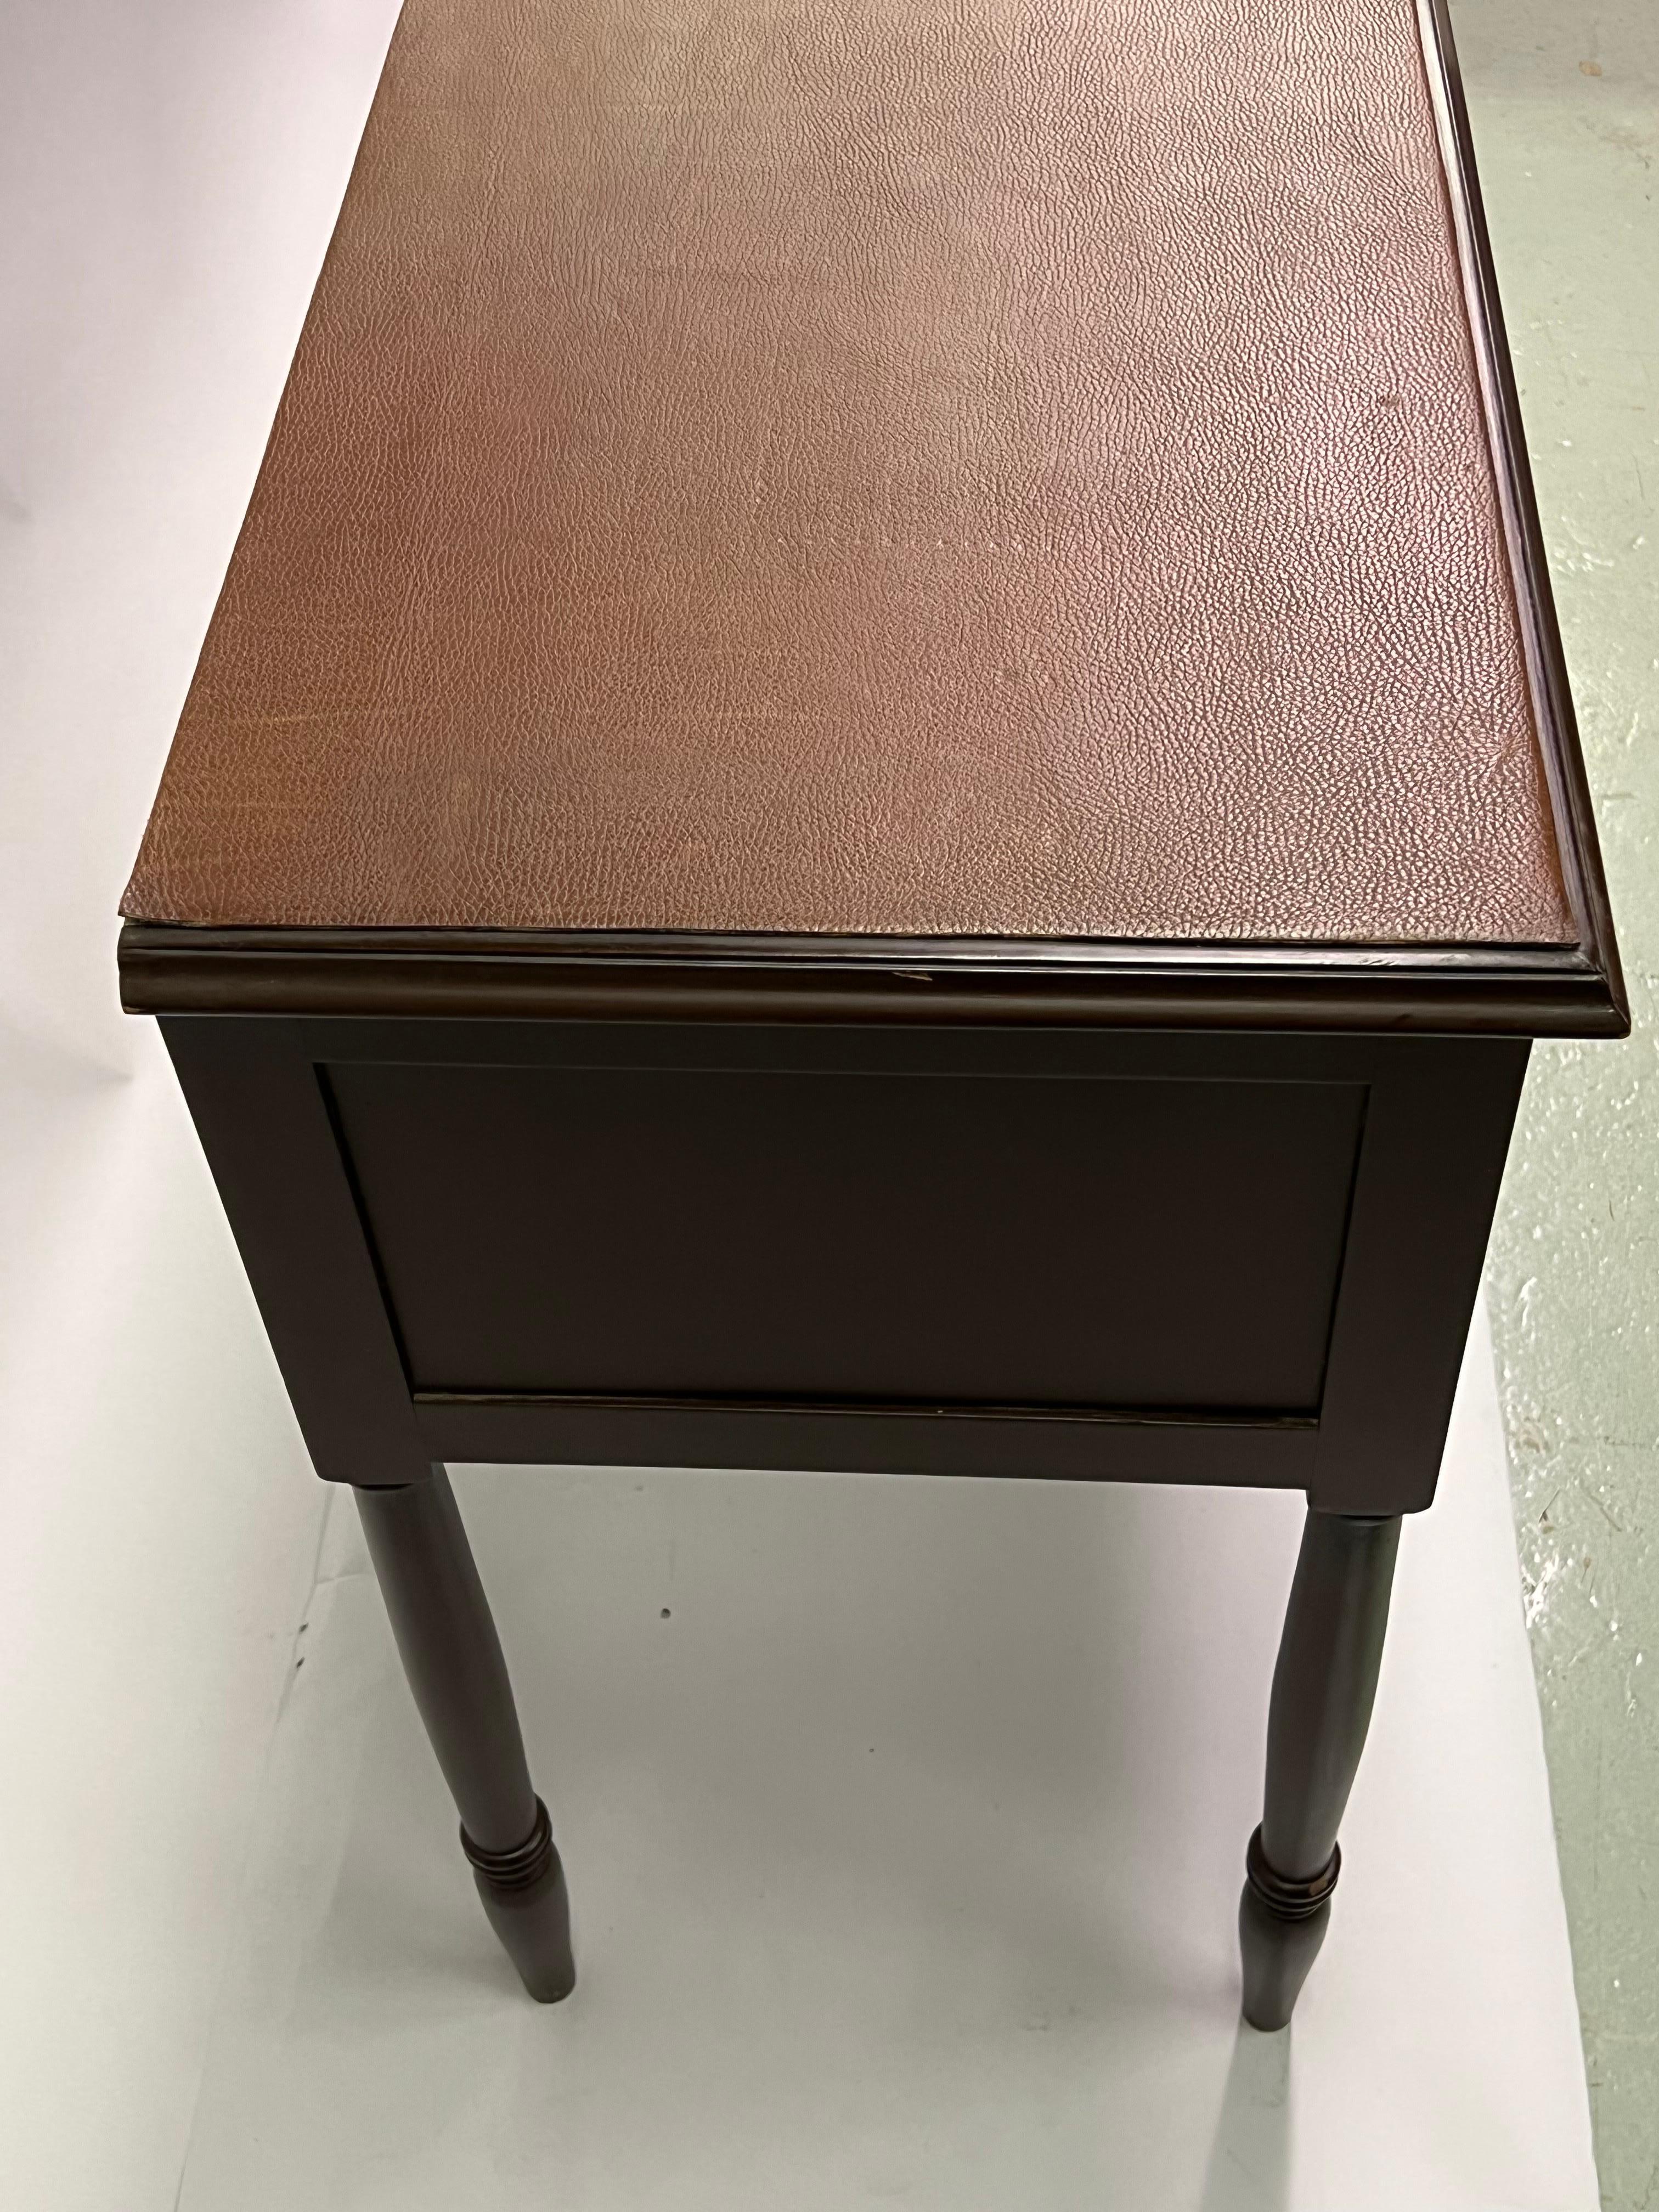 French Mid-Century Modern Neoclassical Leather Console after Jean-Michel Frank For Sale 6